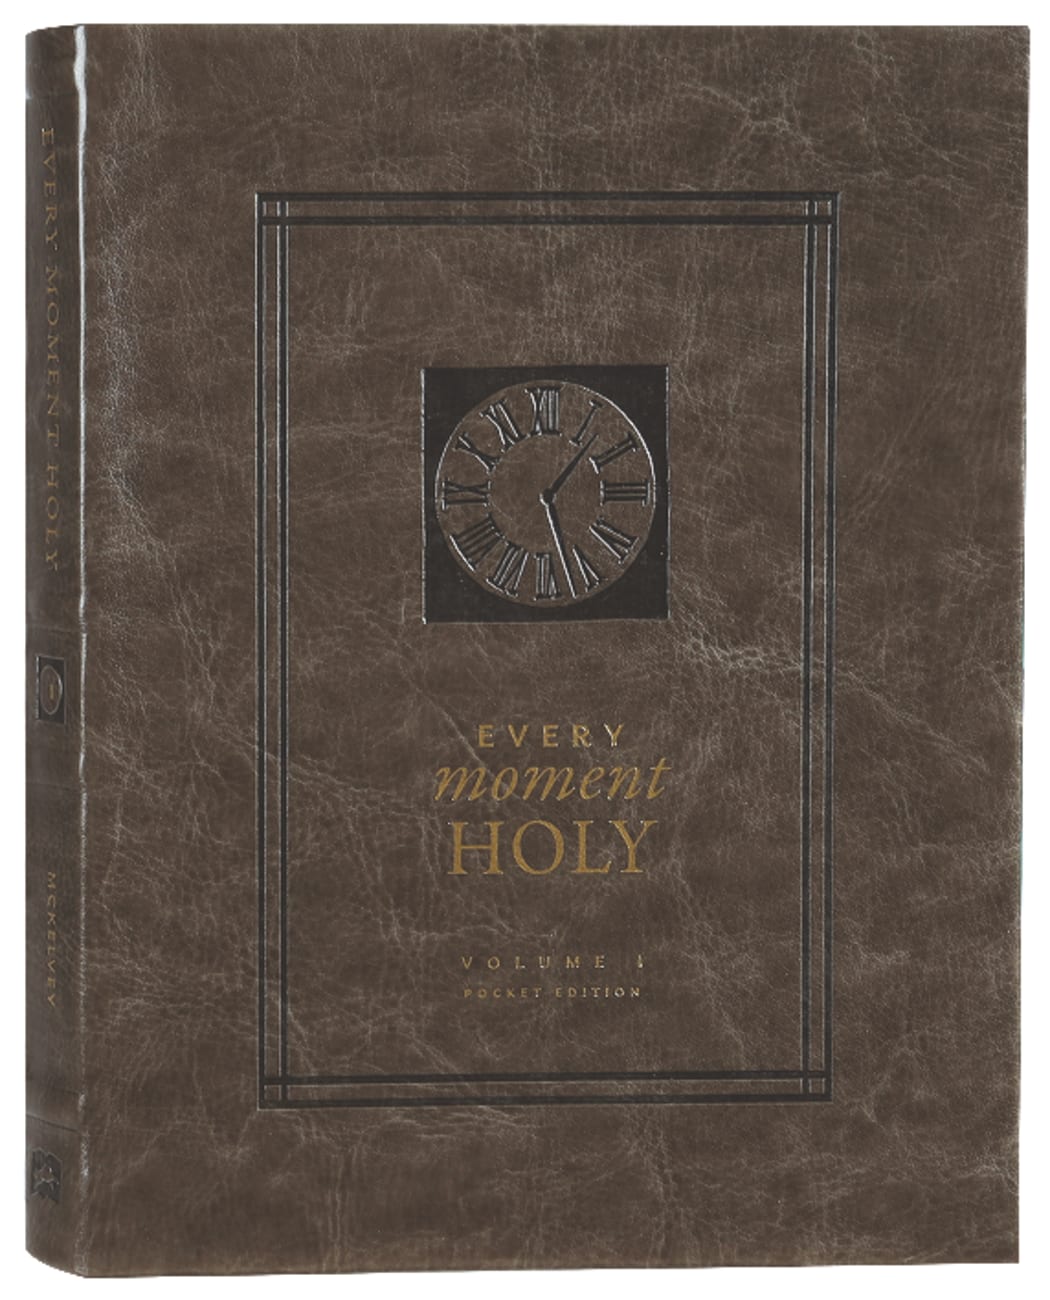 New Liturgies For Daily Life (Pocket Edition) (#01 in Every Moment Holy Series) Imitation Leather